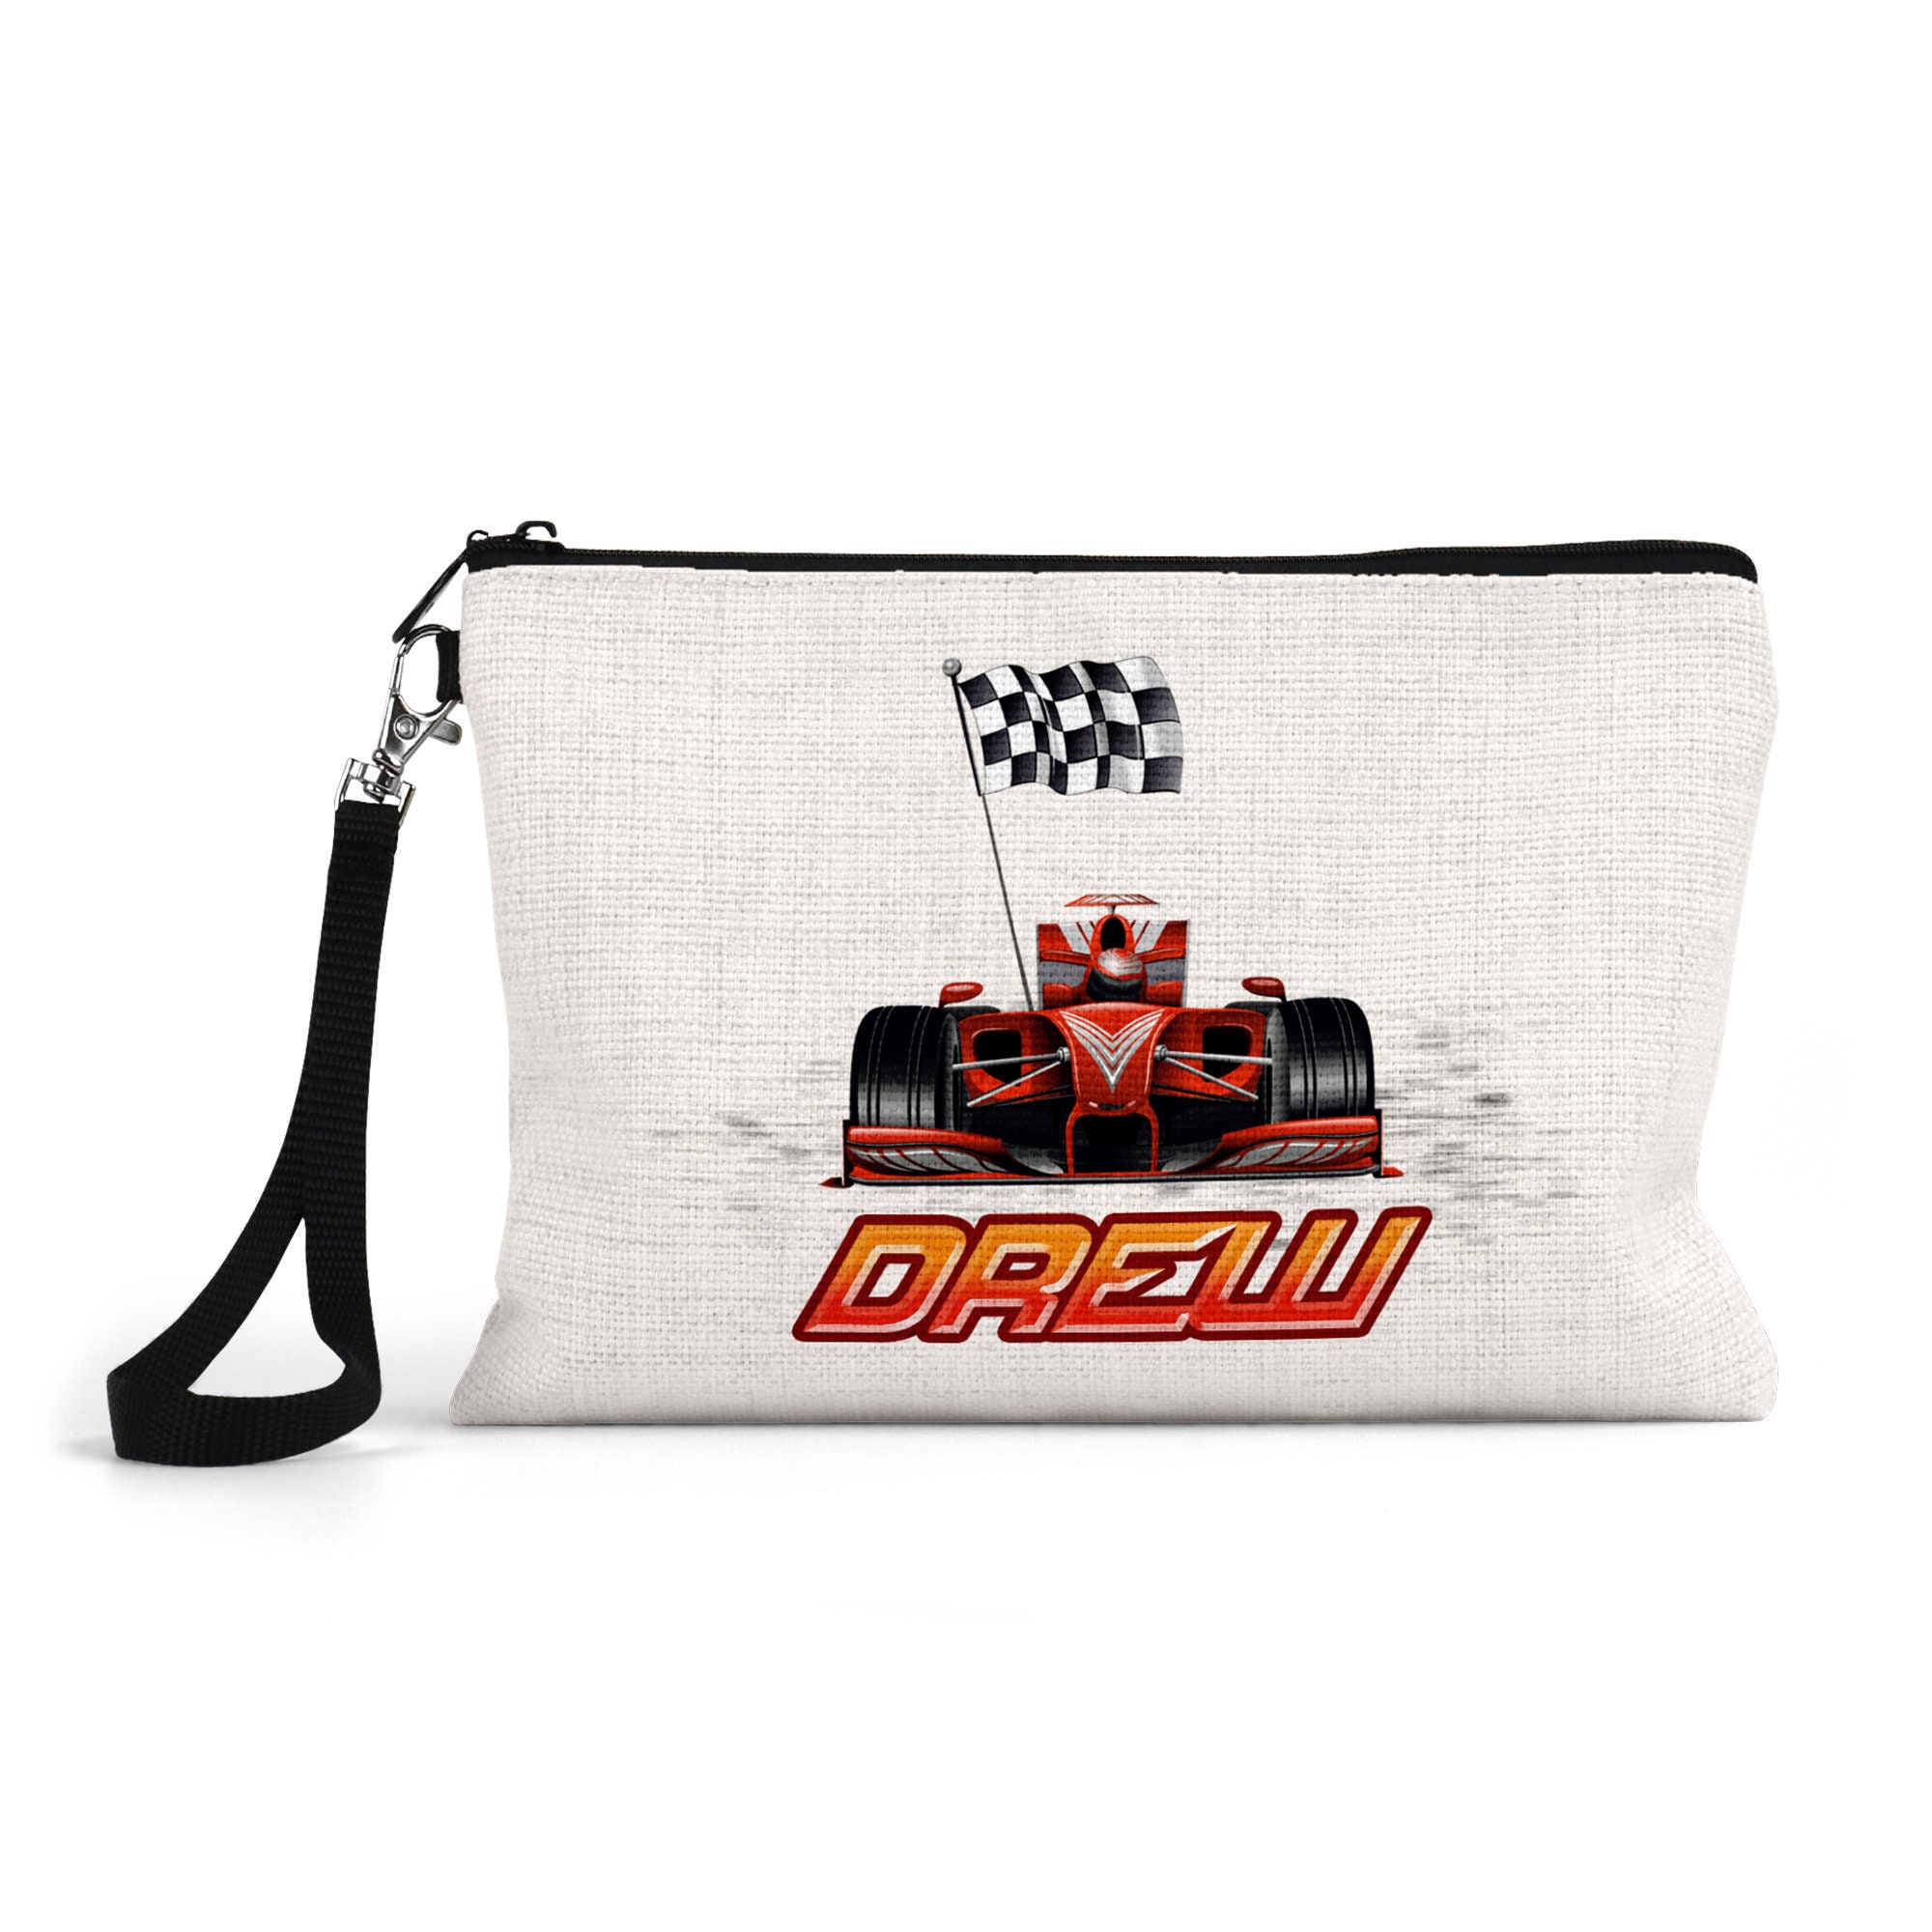 Personalised Pencil Case.. Boys Fast Racing Car..boy Racer back to  School.. Christmas Bag Gift Birthday Stocking Filler 